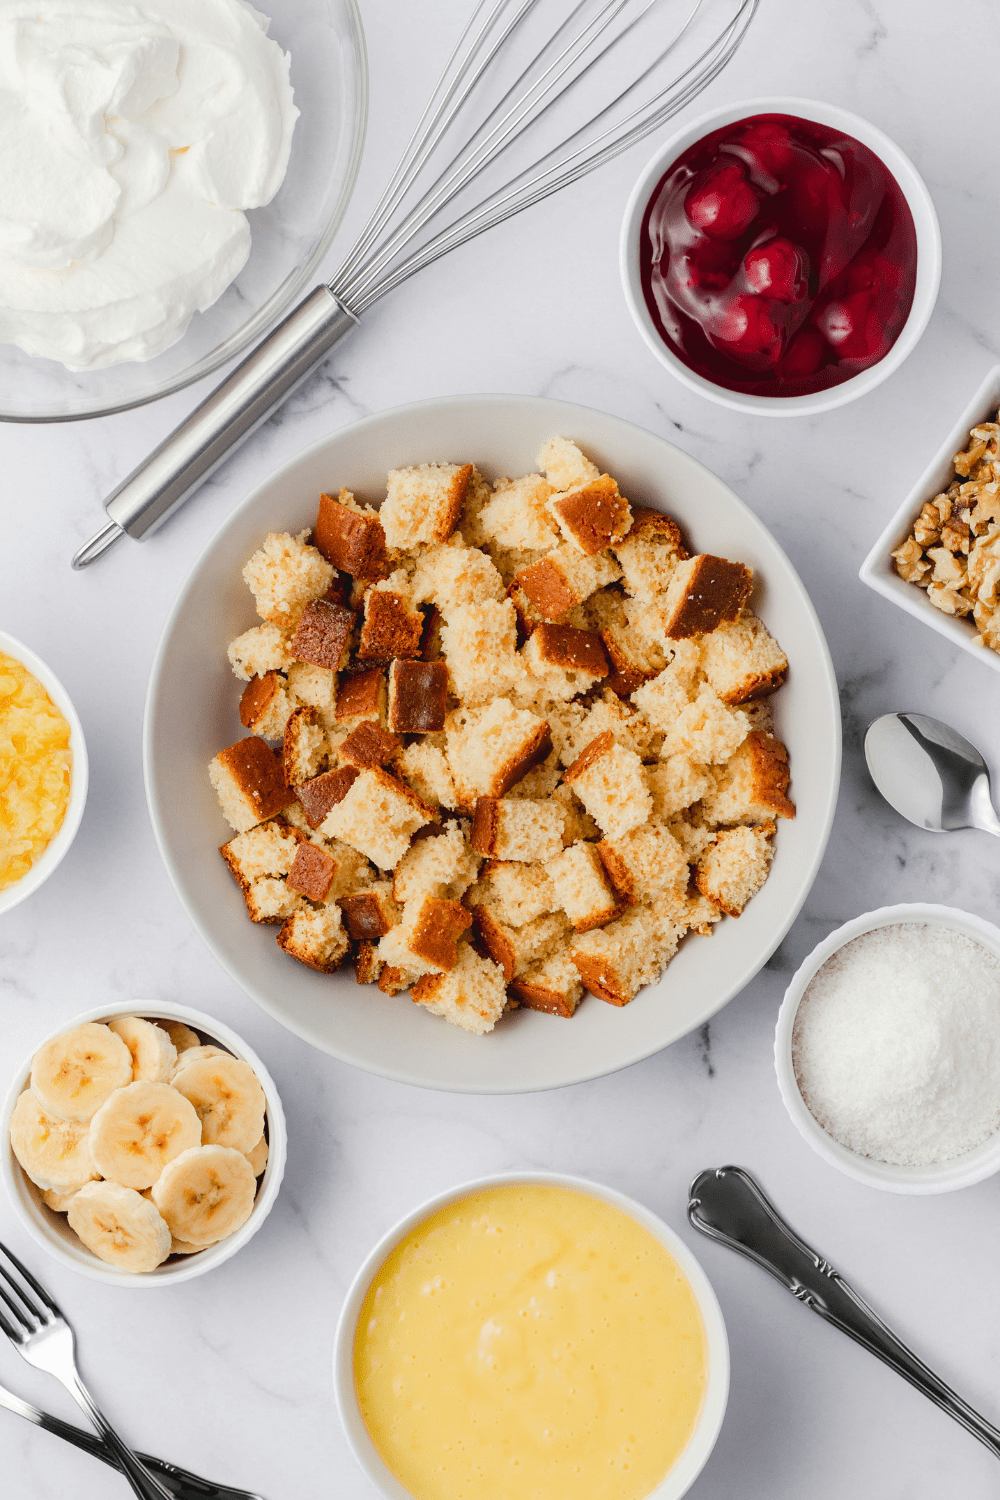 Punch Bowl Cake Ingredients: Croutons, Sliced Bananas, Coconut Flakes, Whipped Cream and Walnuts